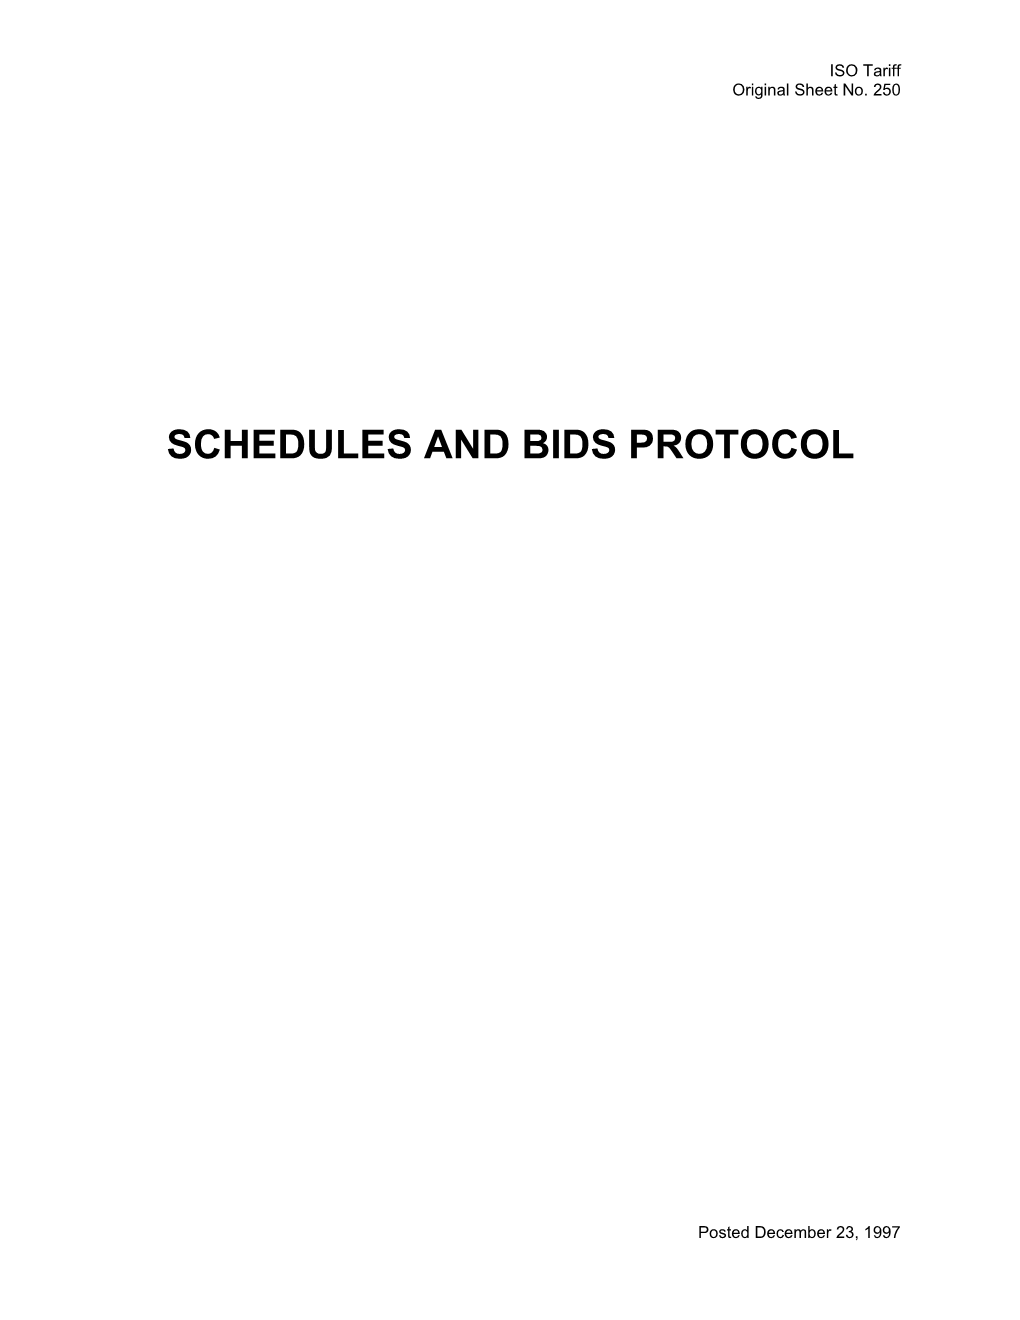 Schedules and Bids Protocol (SBP)